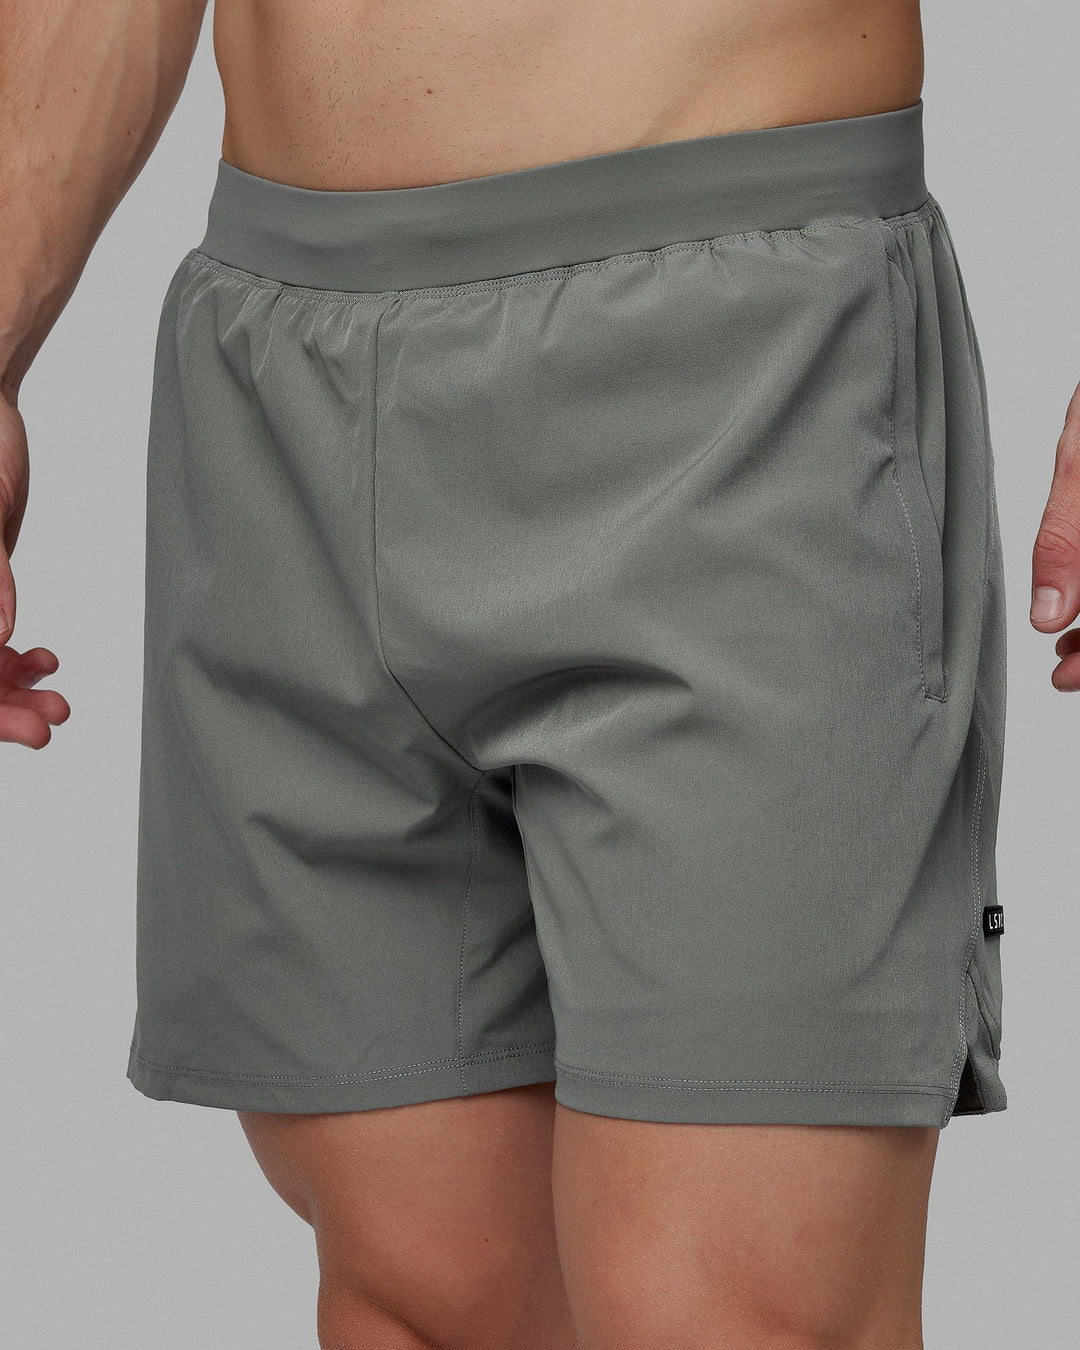 Man wearing Challenger 6" Lined Performance Short - Graphite